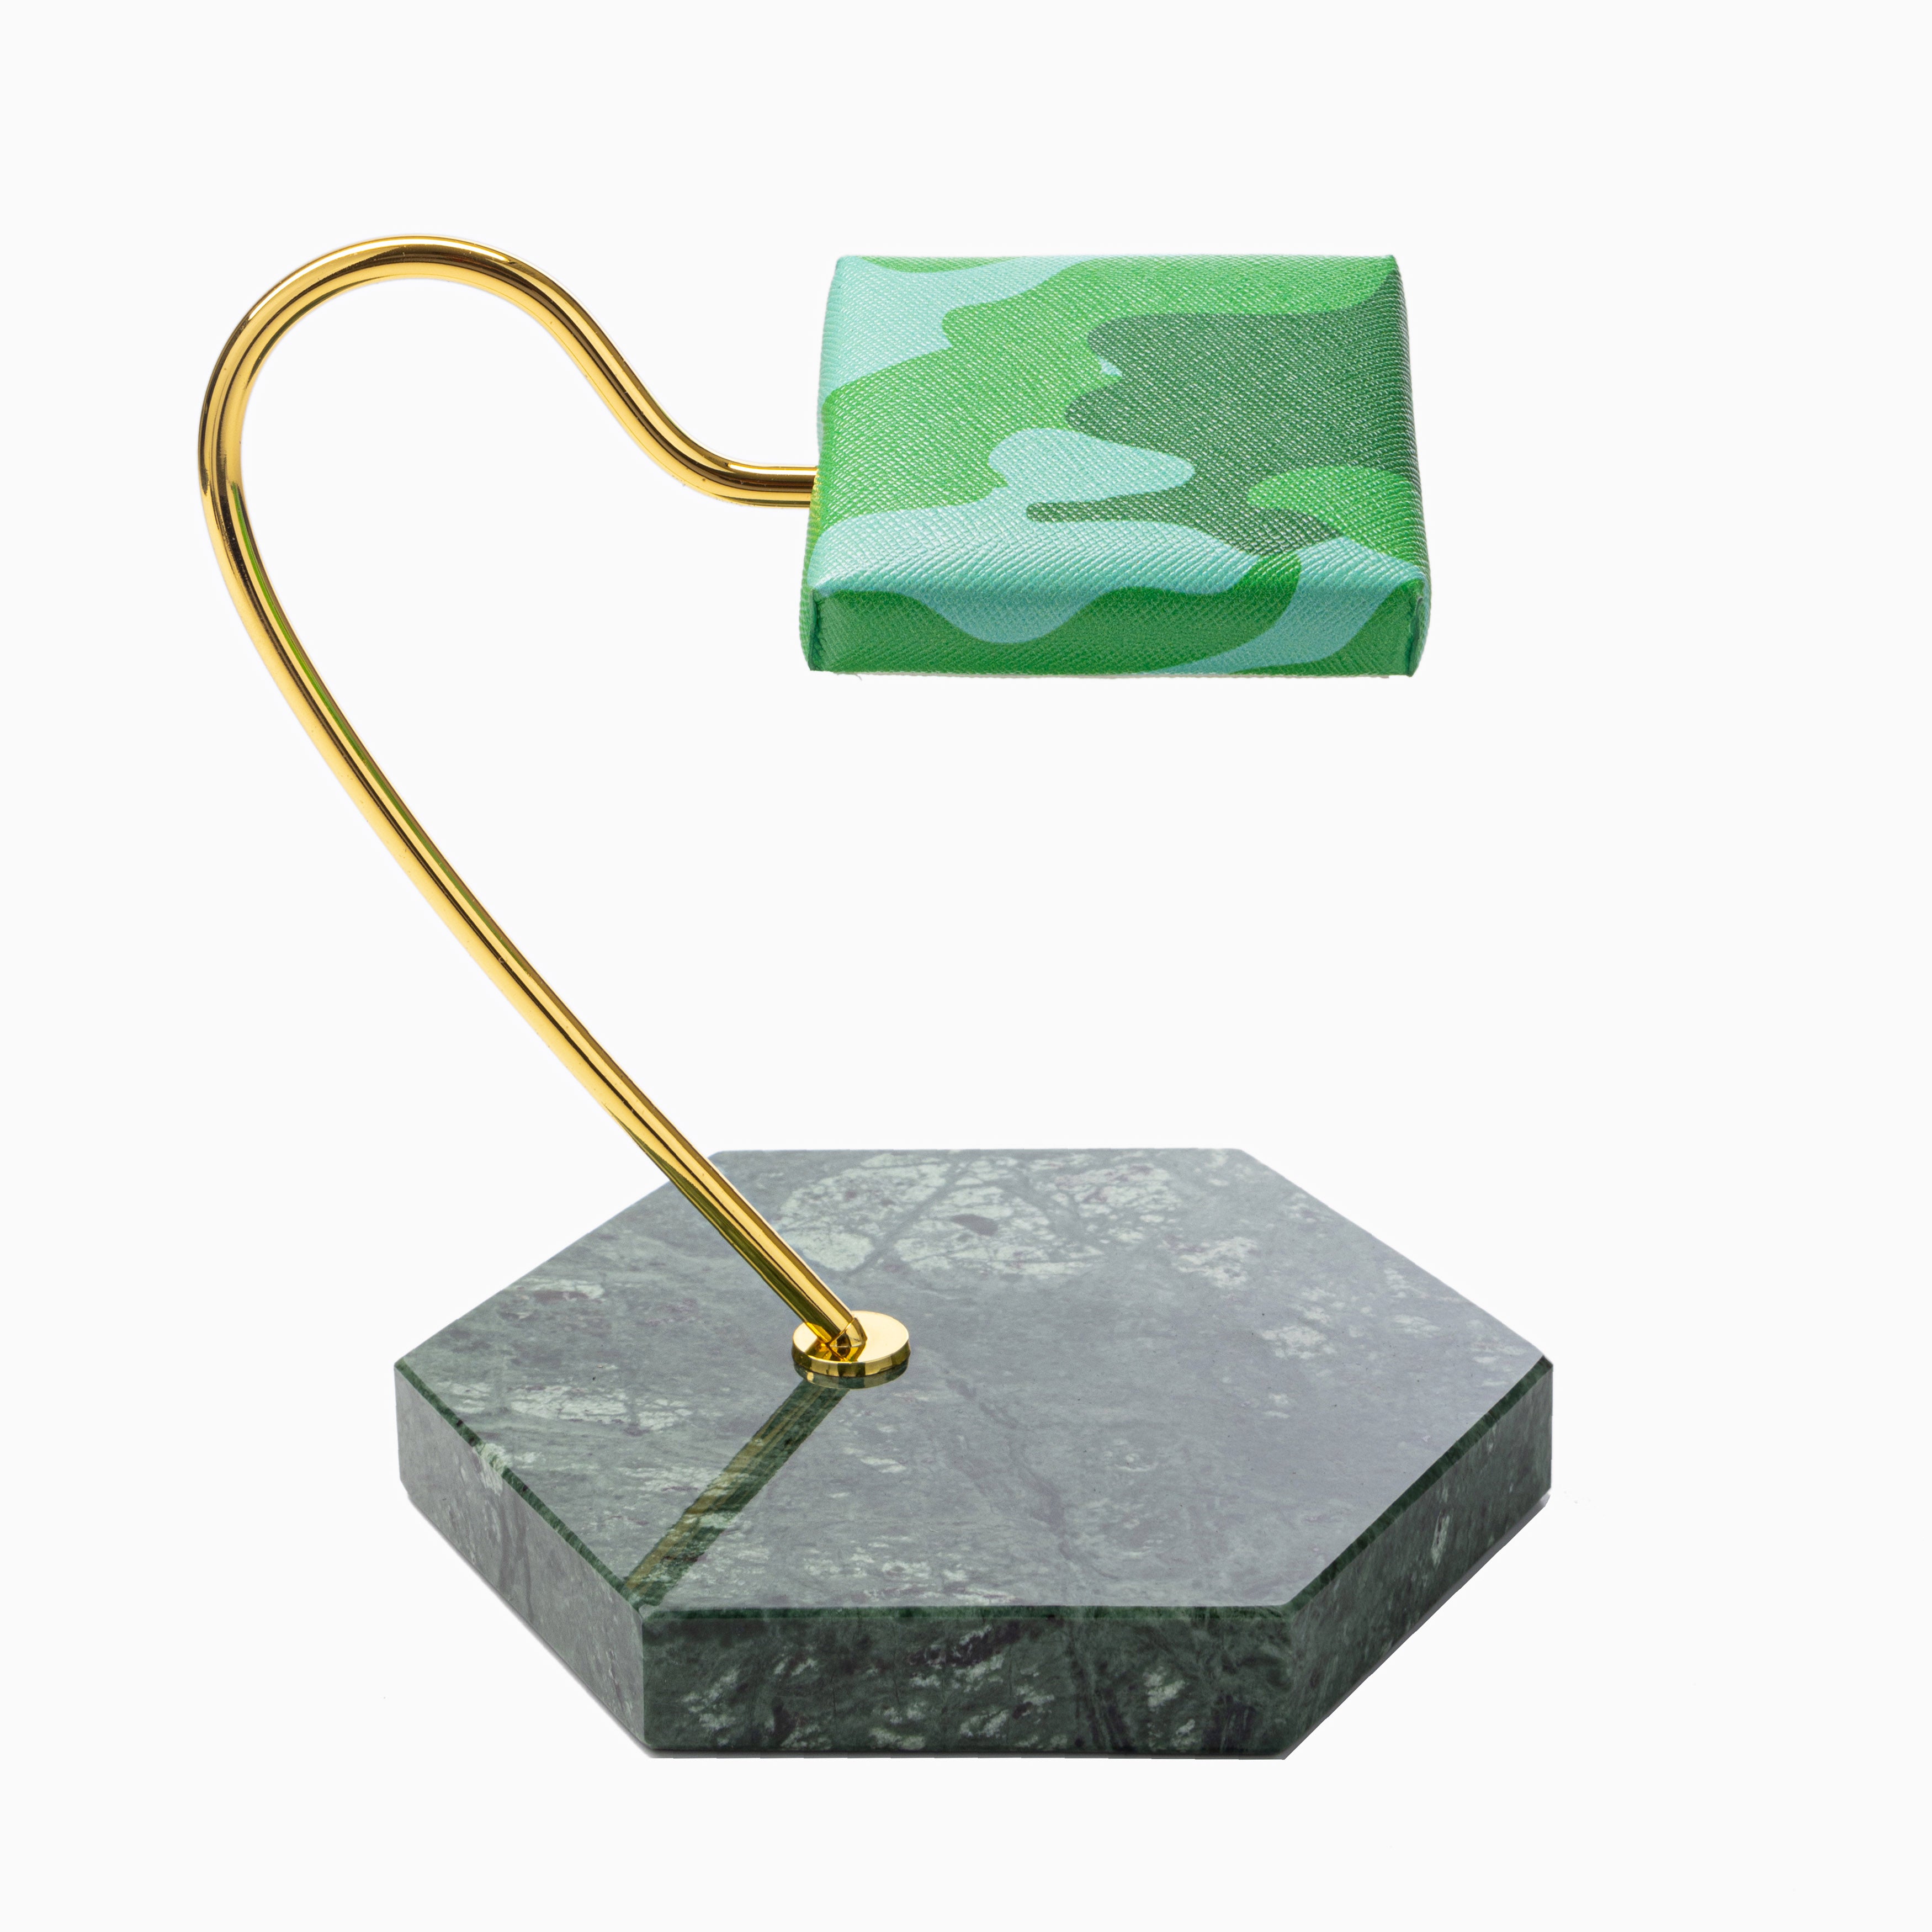 Watch Stand - Green Camo (Limited Edition)